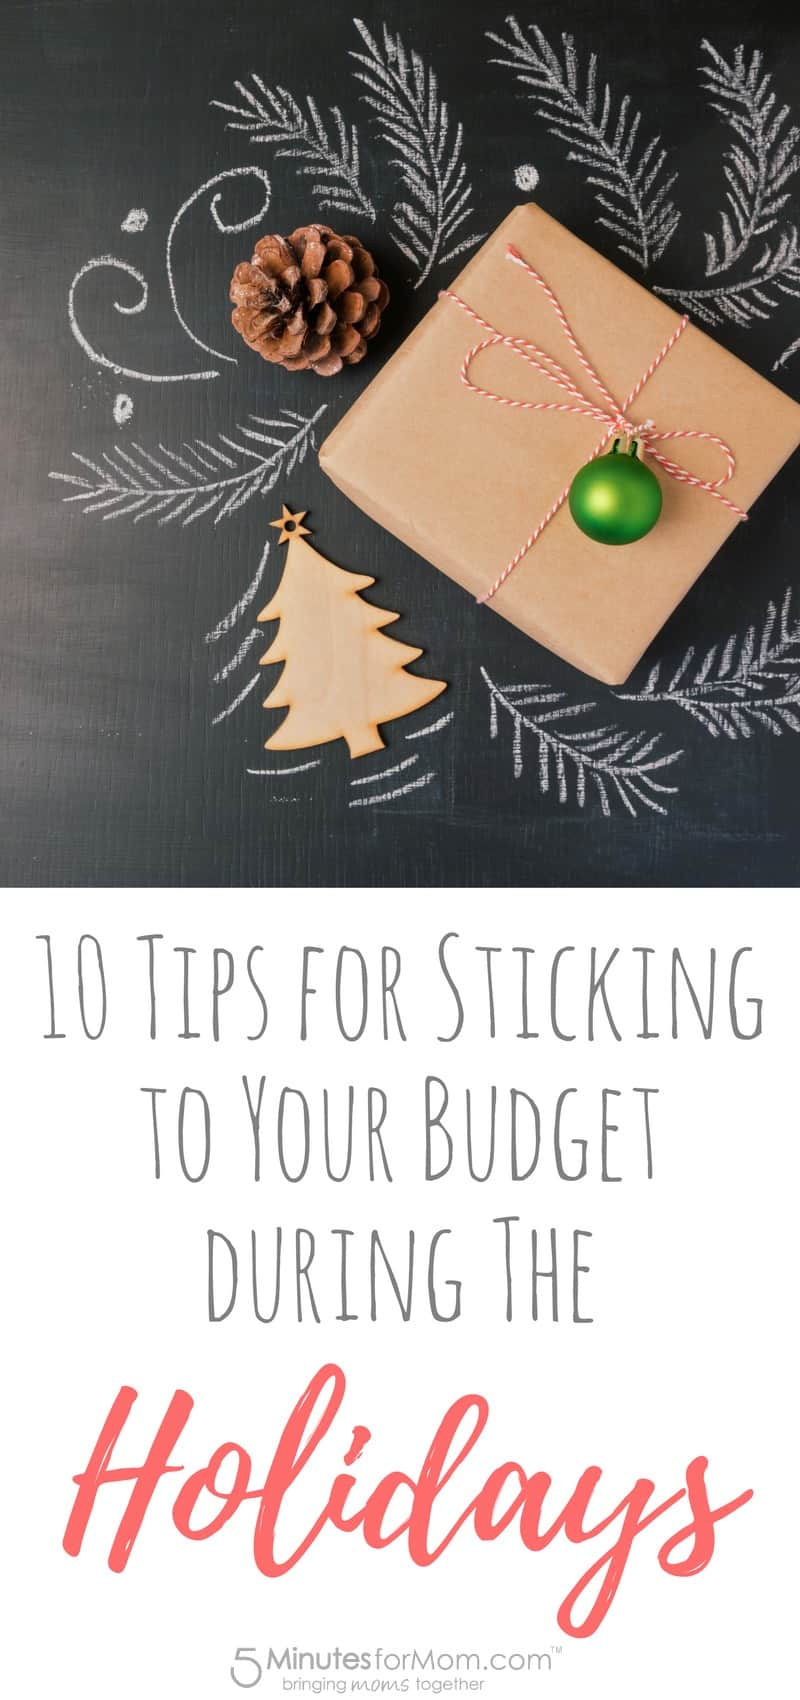 10 Tips for Sticking to Your Budget during the Holidays - Christmas Budget